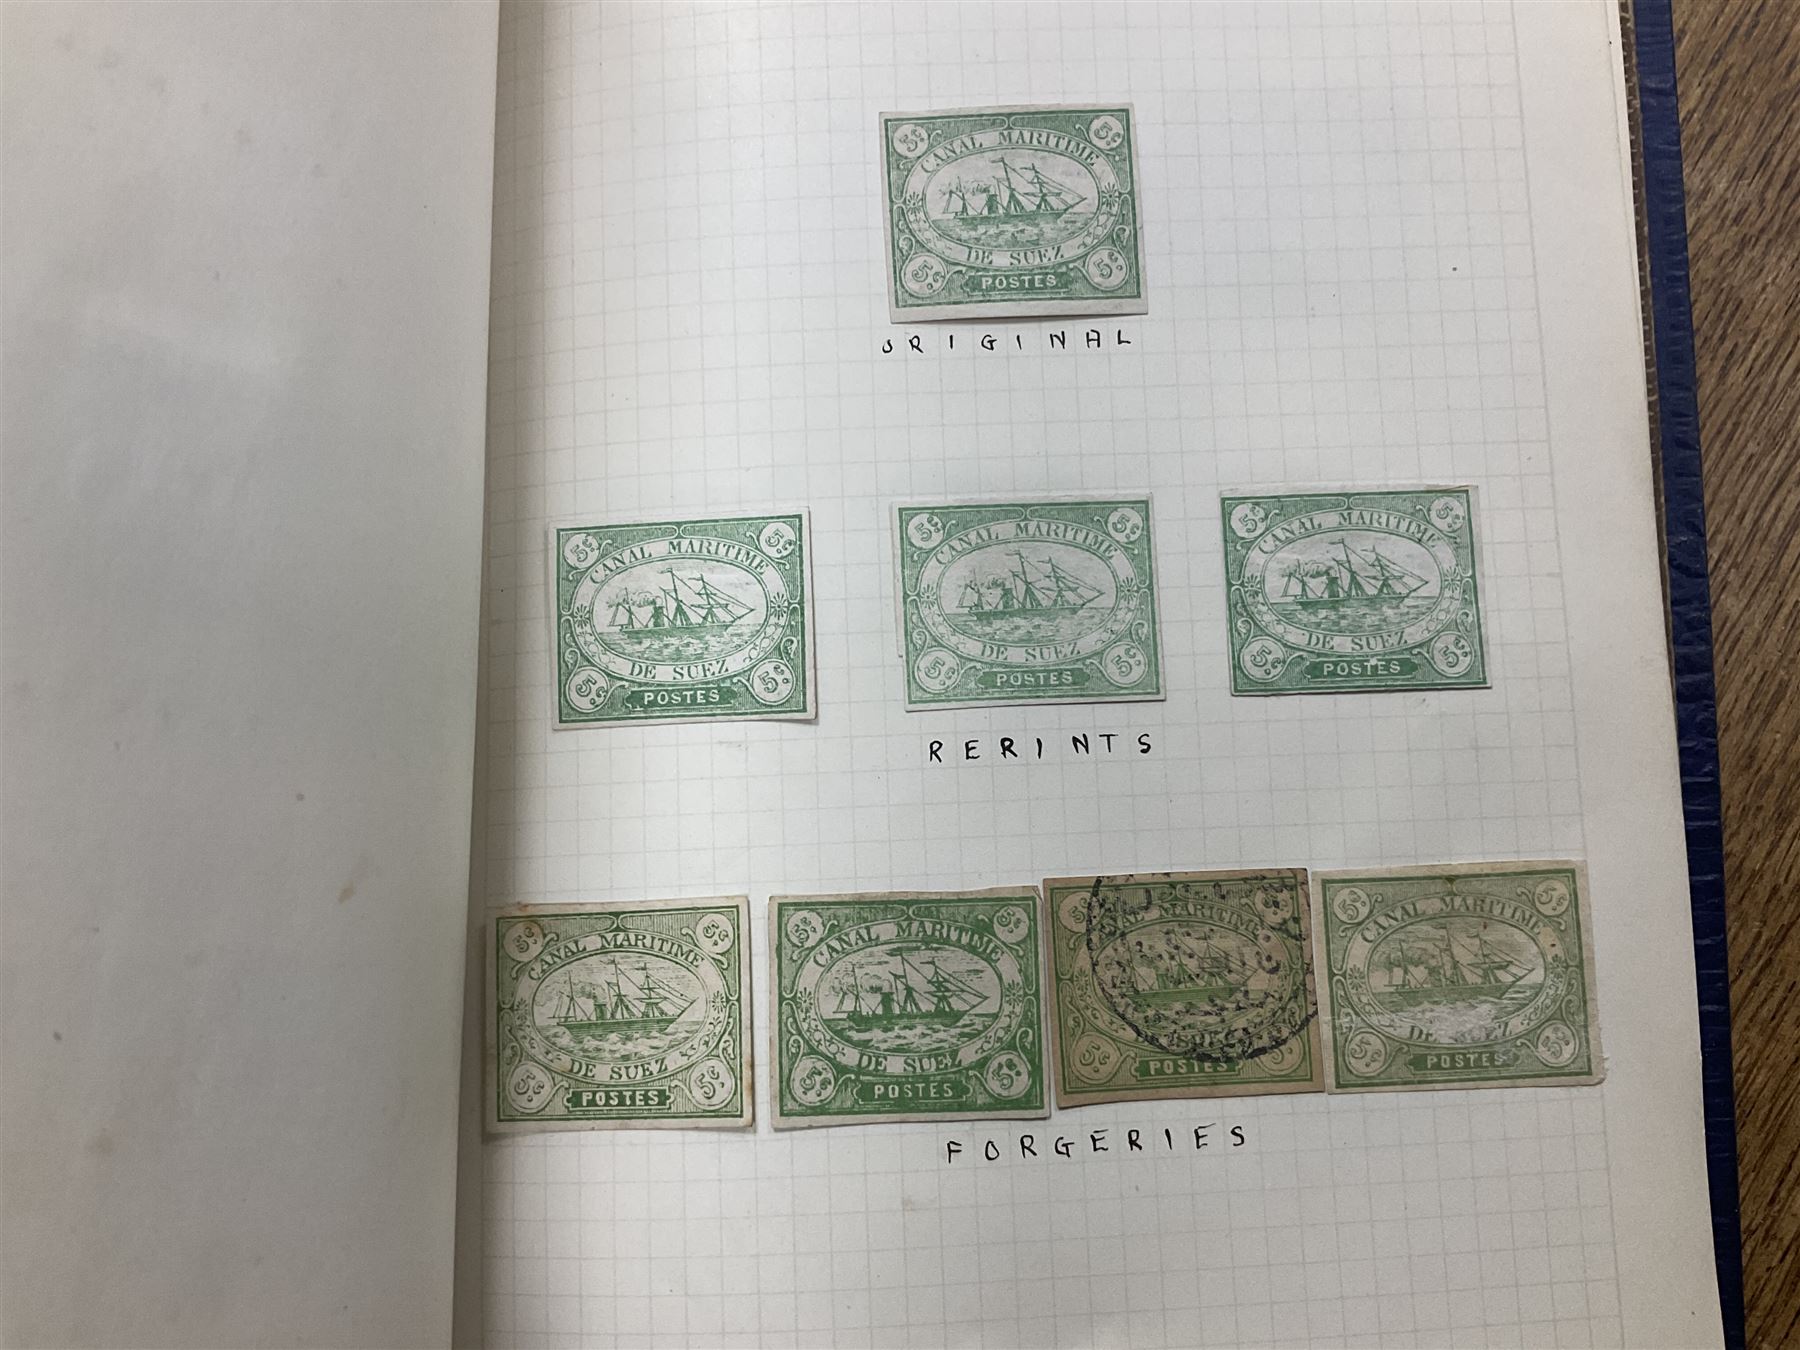 Egypt 1866 and later stamps - Image 605 of 761